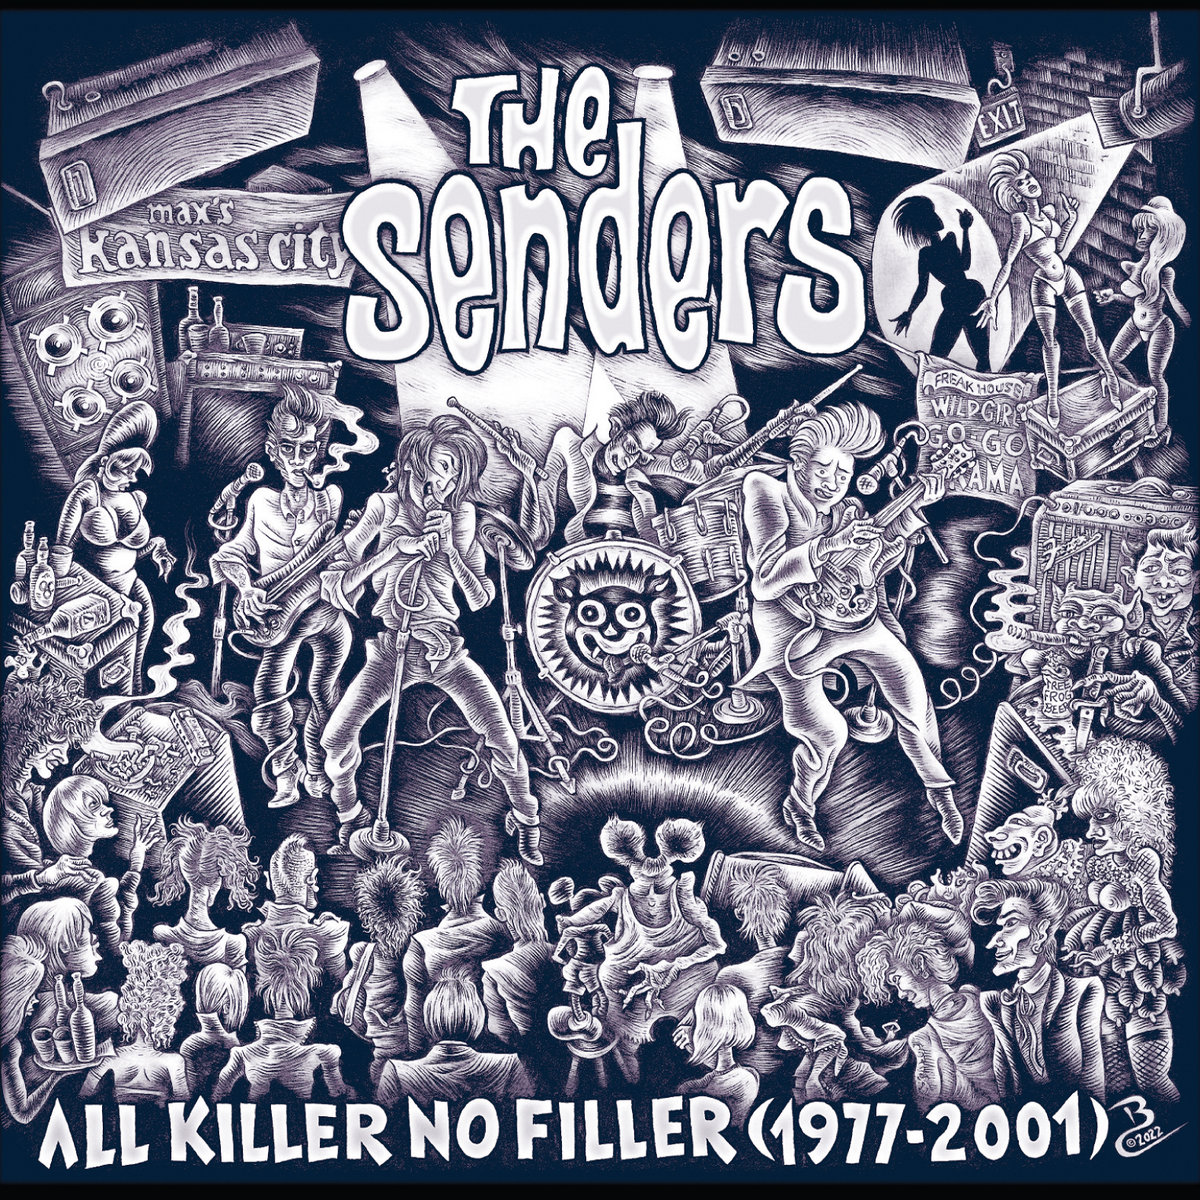 Young Label Left For Dead Brings Two Crucial NYC Punk Bands Back to Life with The Senders “All Killer No Filler (1977-2001)” Compilation and Nastyfacts’ “Drive My Car” Single